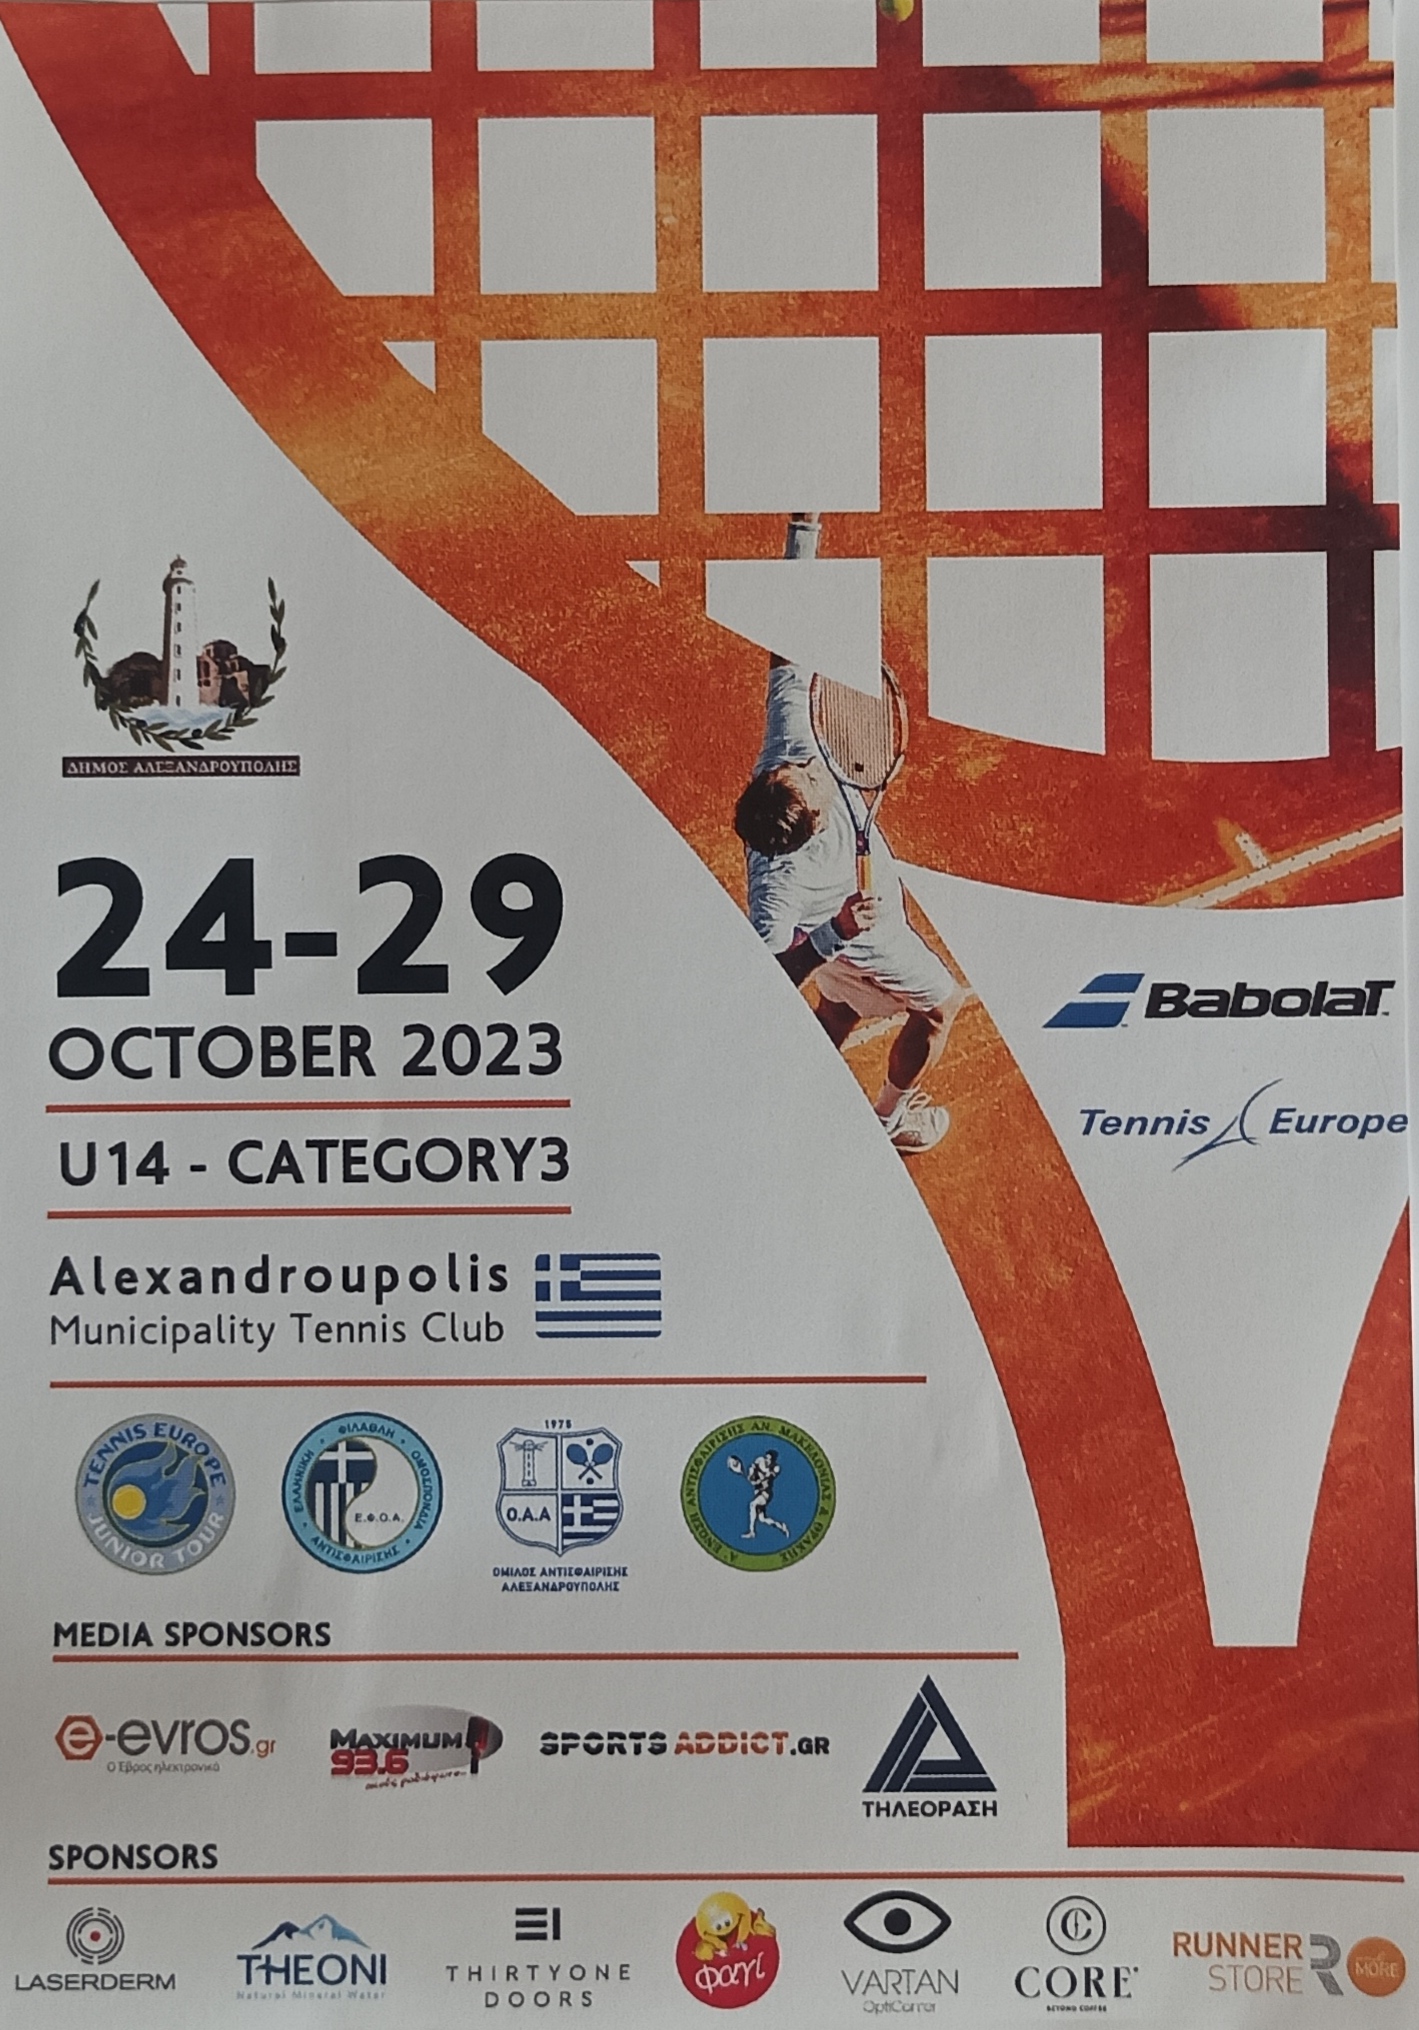 Alexandroupolis Junior Cup 29/10/2023 Live streaming start time 10:00 FINALS Boys Singles 14 – Girls Singles 14